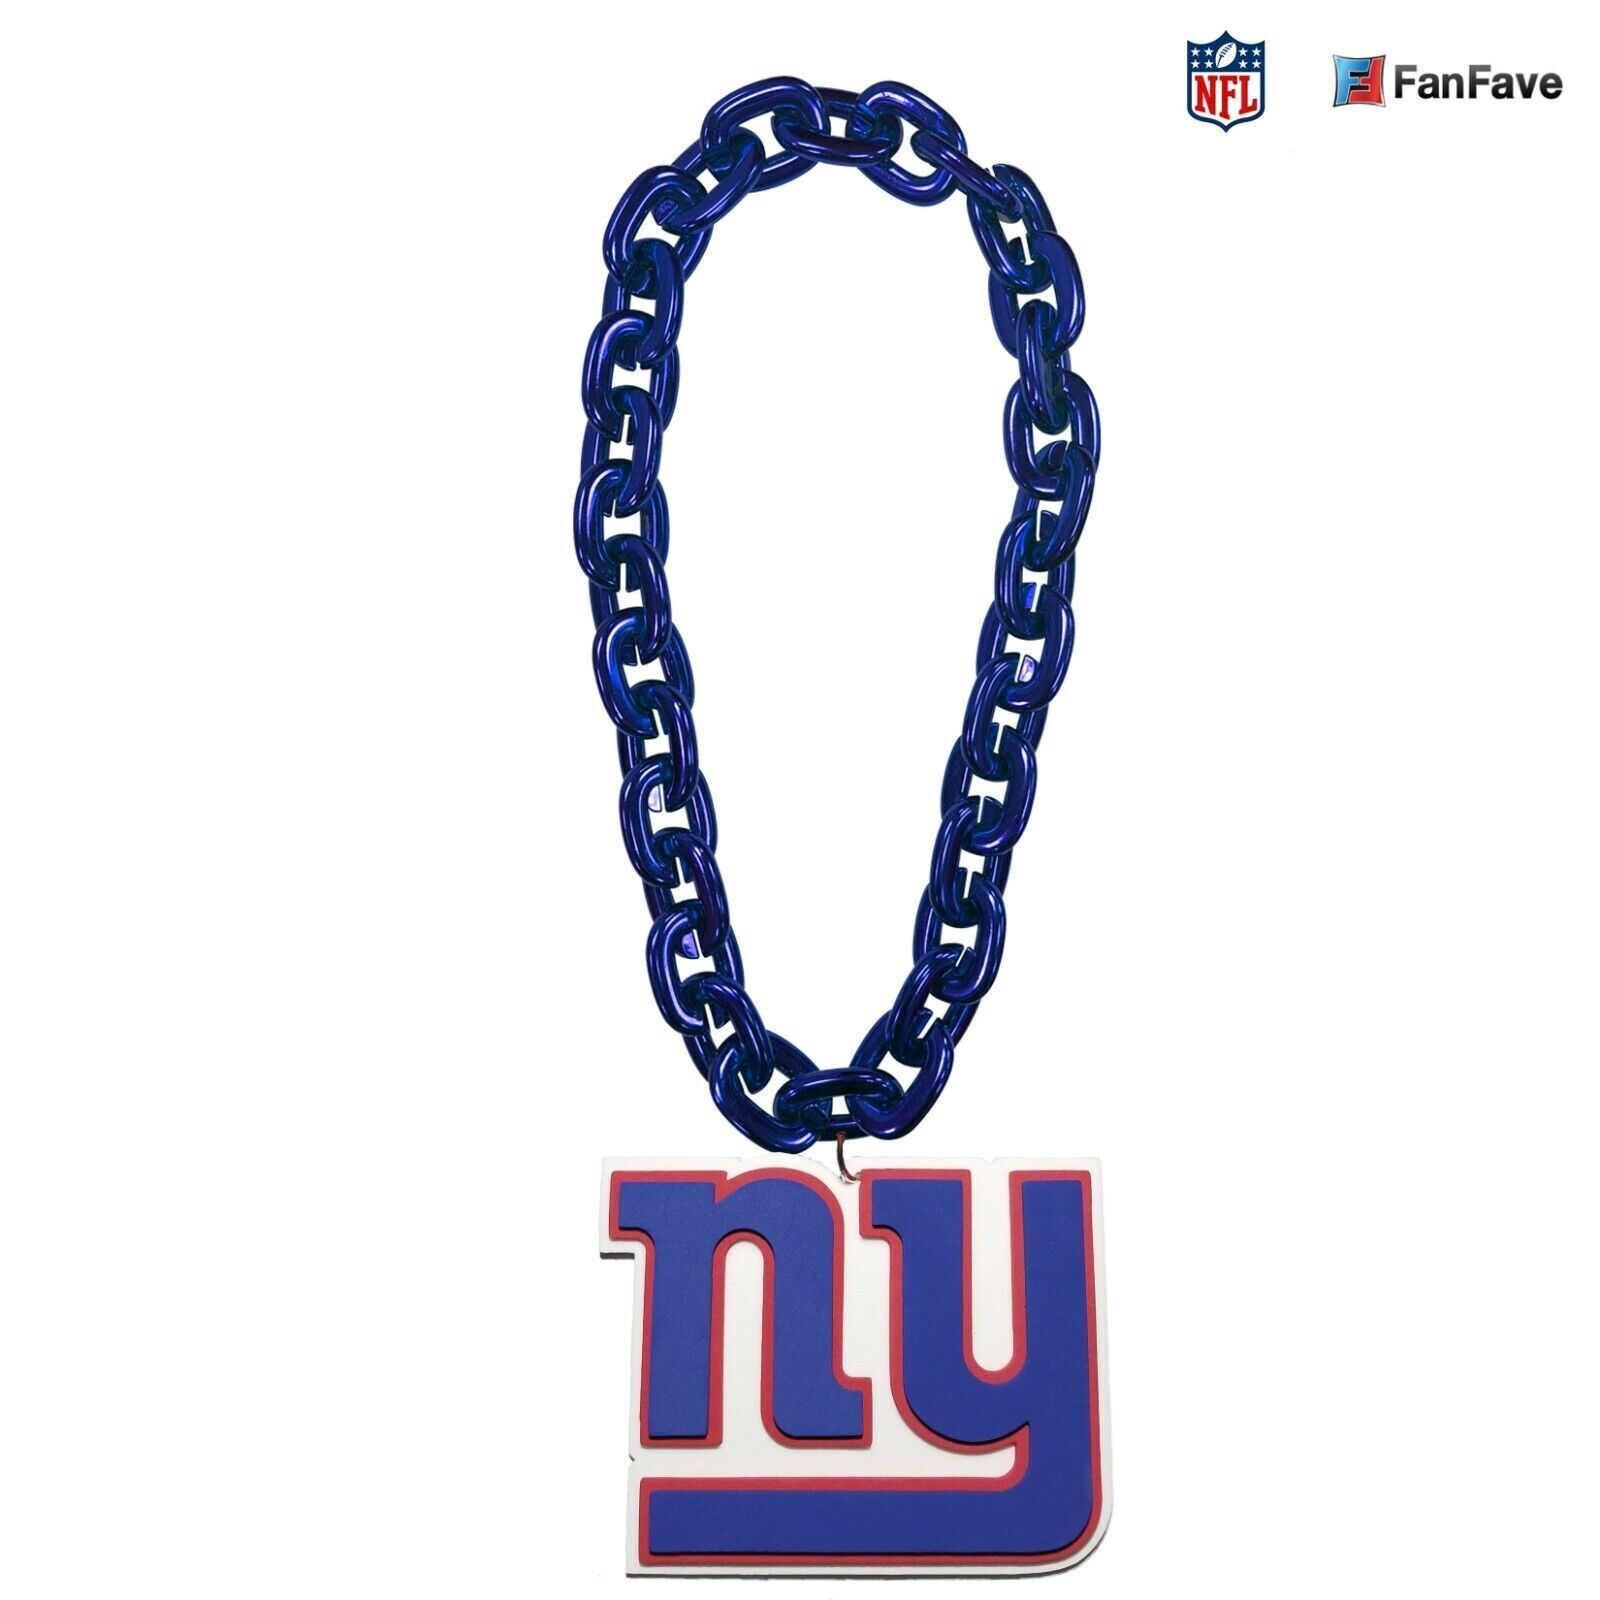 NEW YORK GIANTS NFL 3D Foam Fan Chain Neckless FanFave Made in USA New 3 COLORS